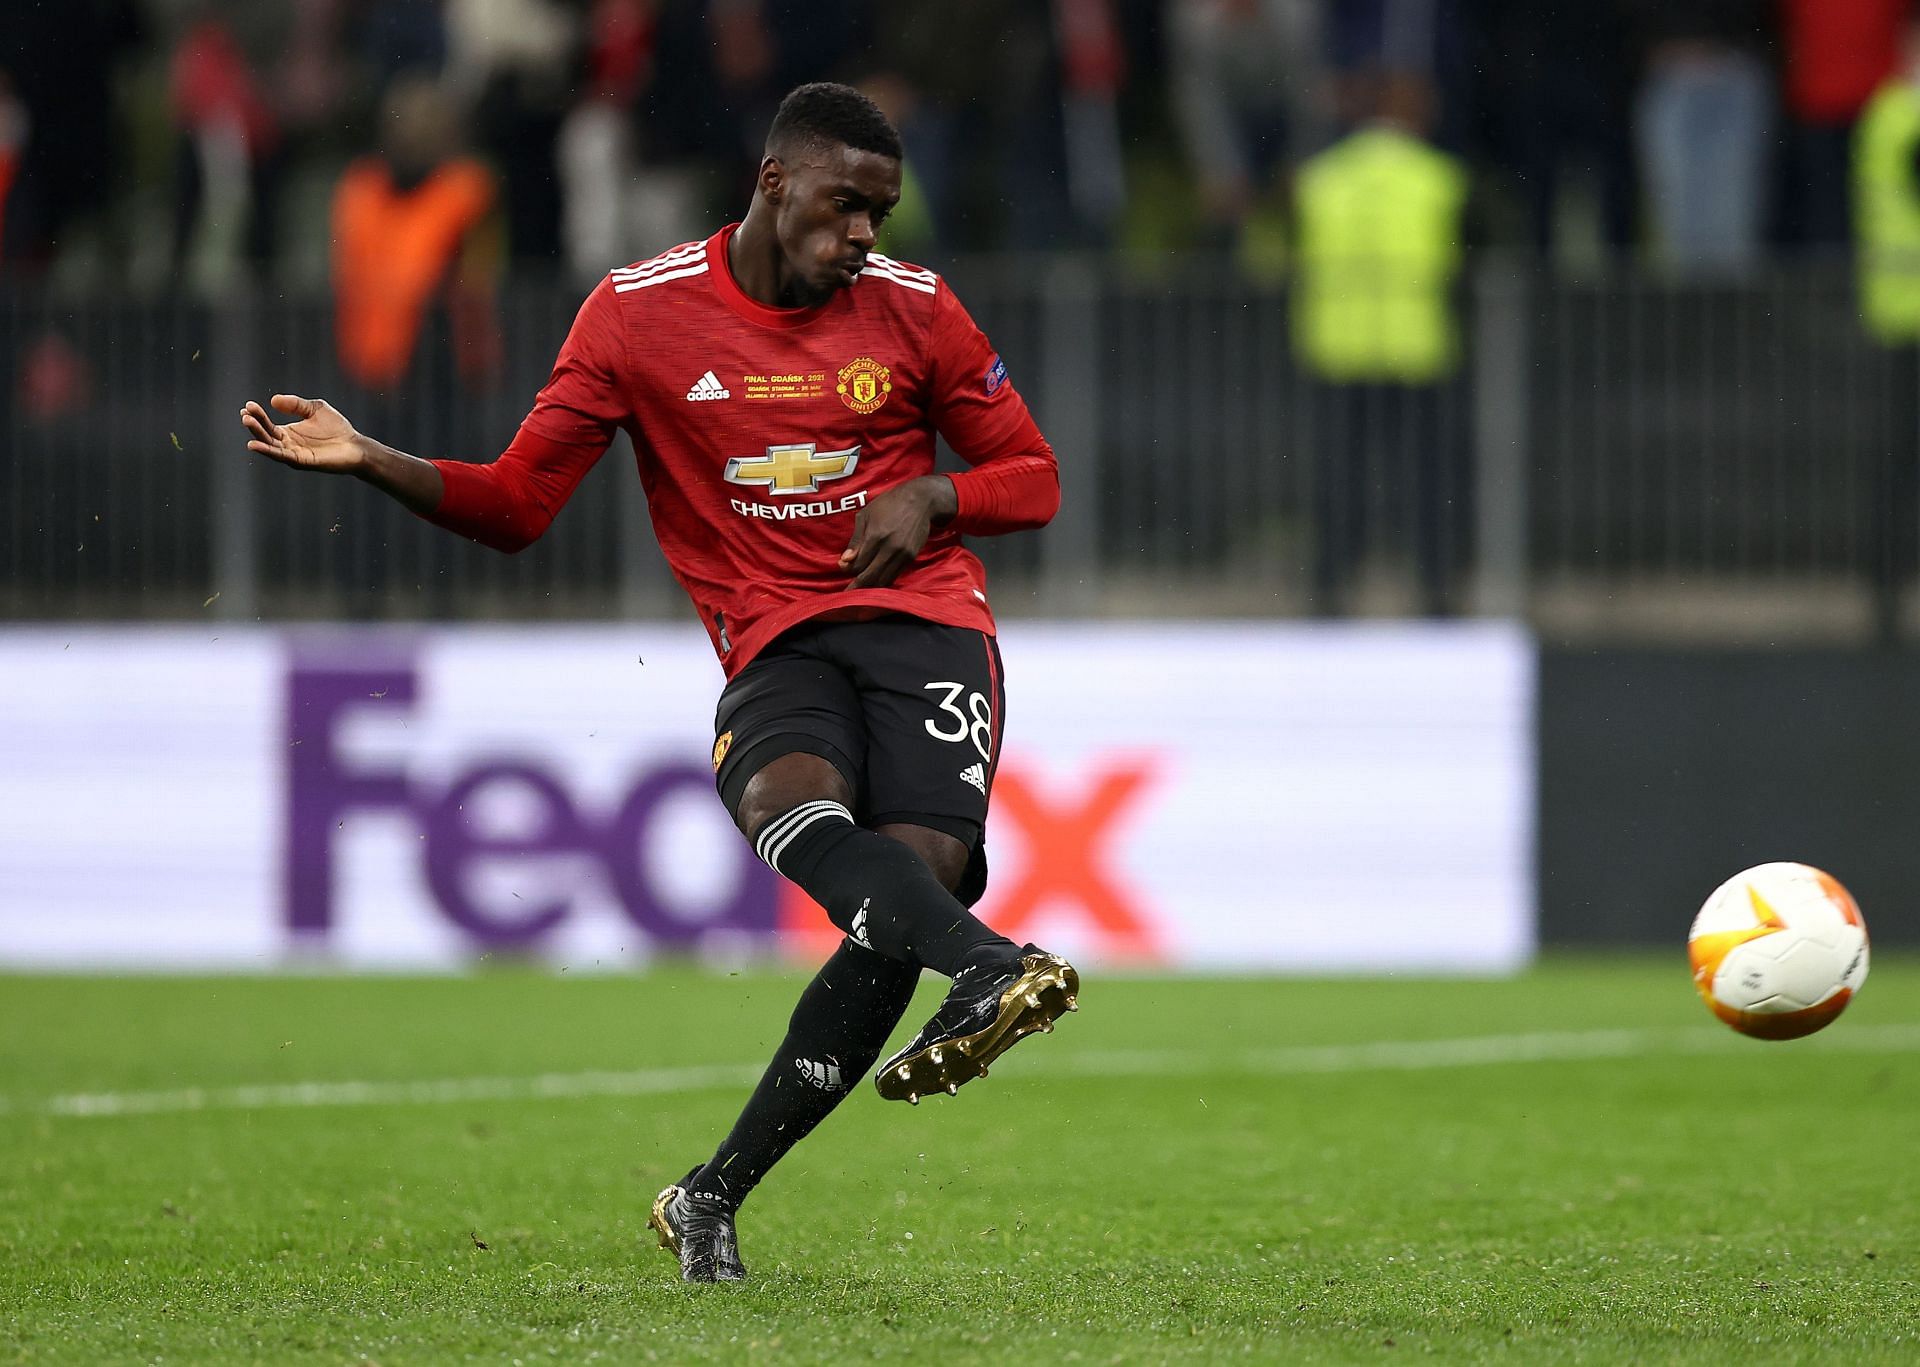 The 24-year-old&#039;s contract with Manchester United expires next year